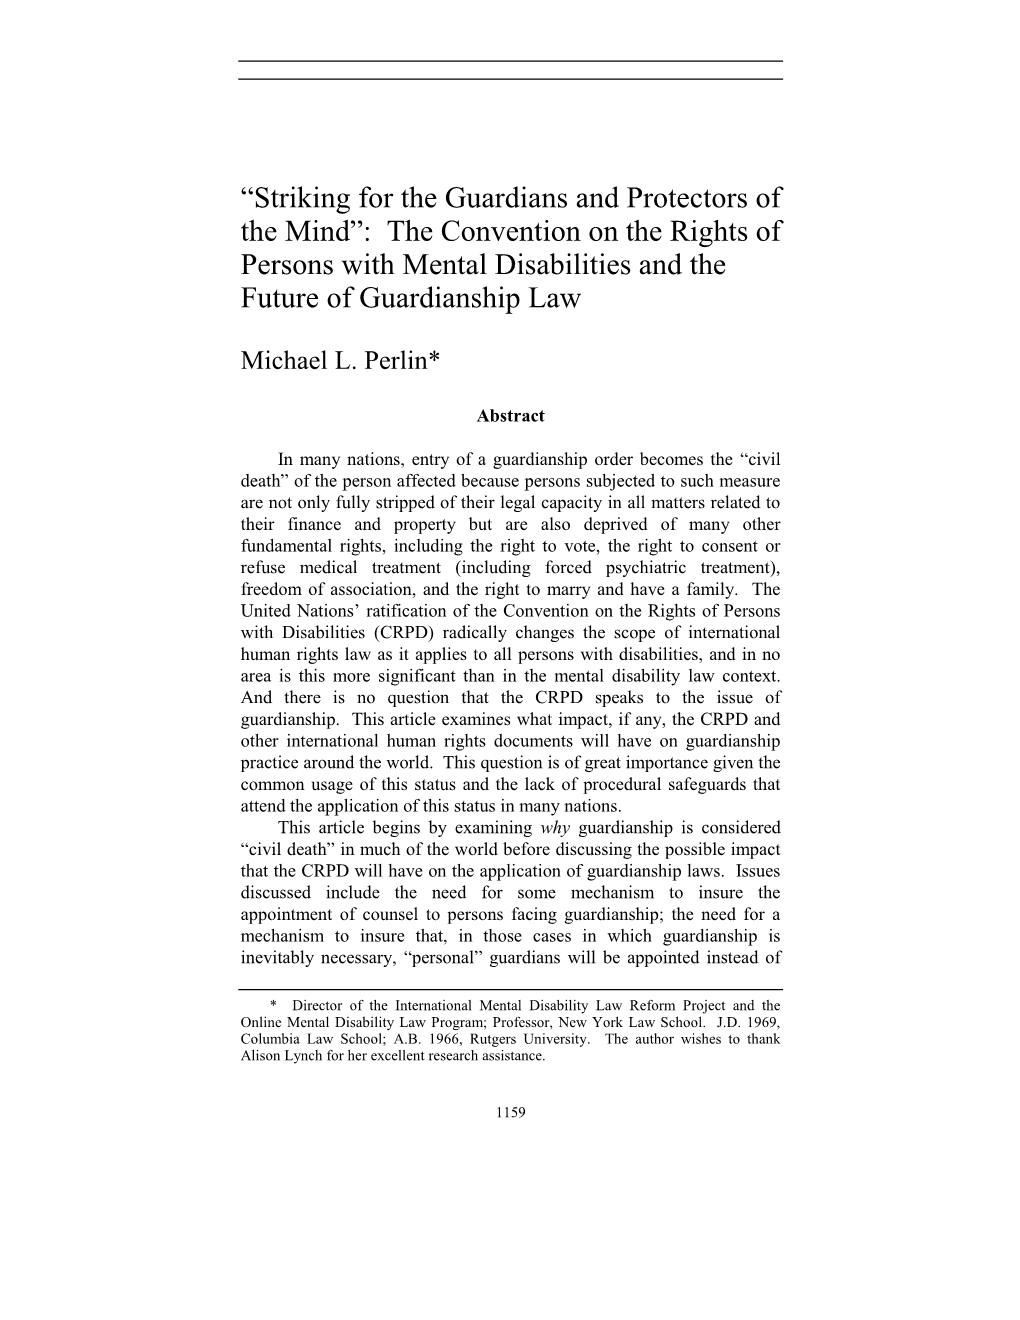 The Convention on the Rights of Persons with Mental Disabilities and the Future of Guardianship Law